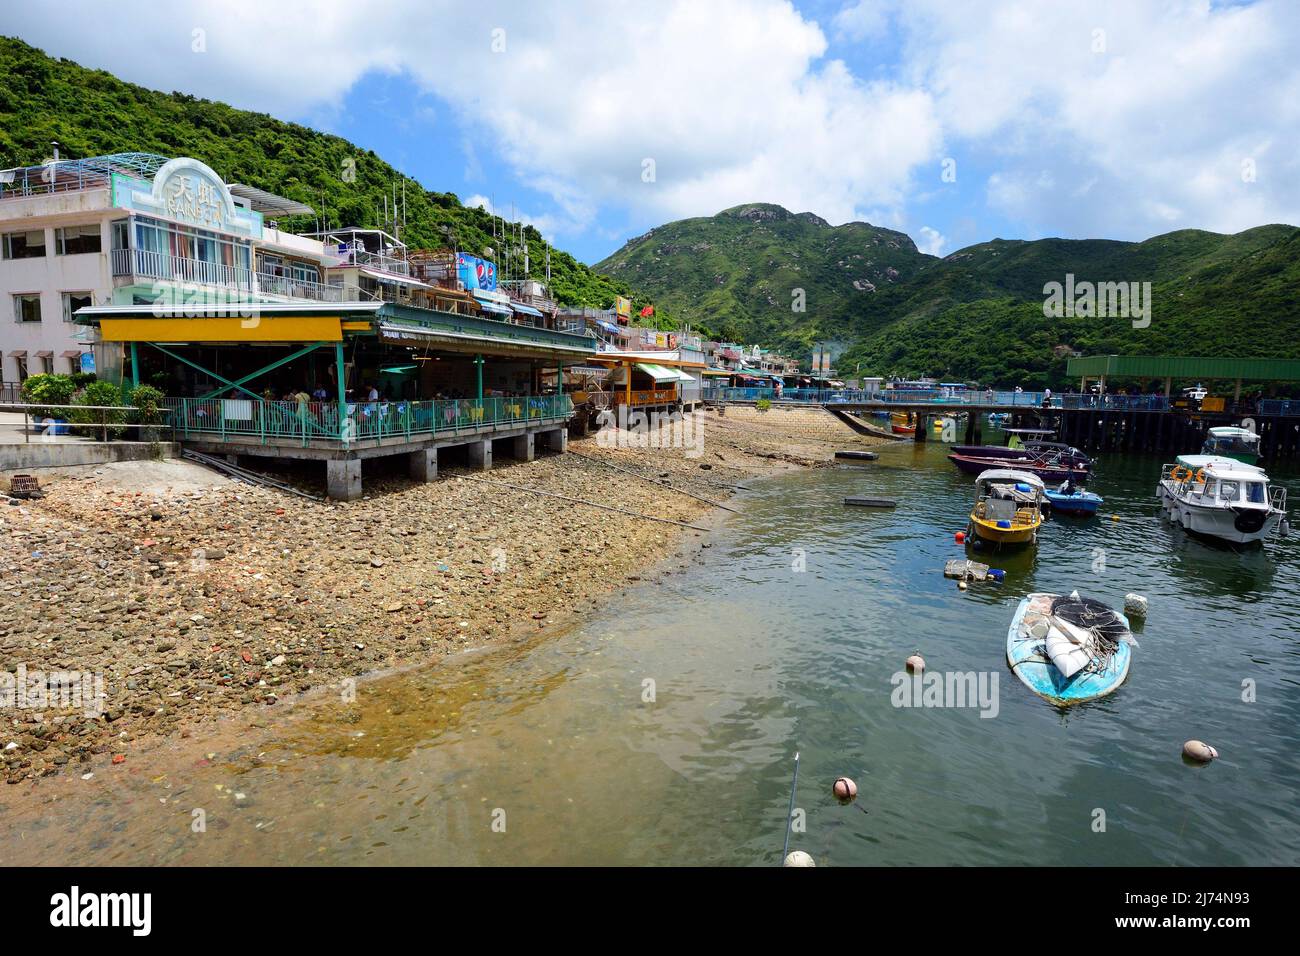 The famous seafood restaurants and the harbour of Lamma Island, China, Hong Kong Stock Photo